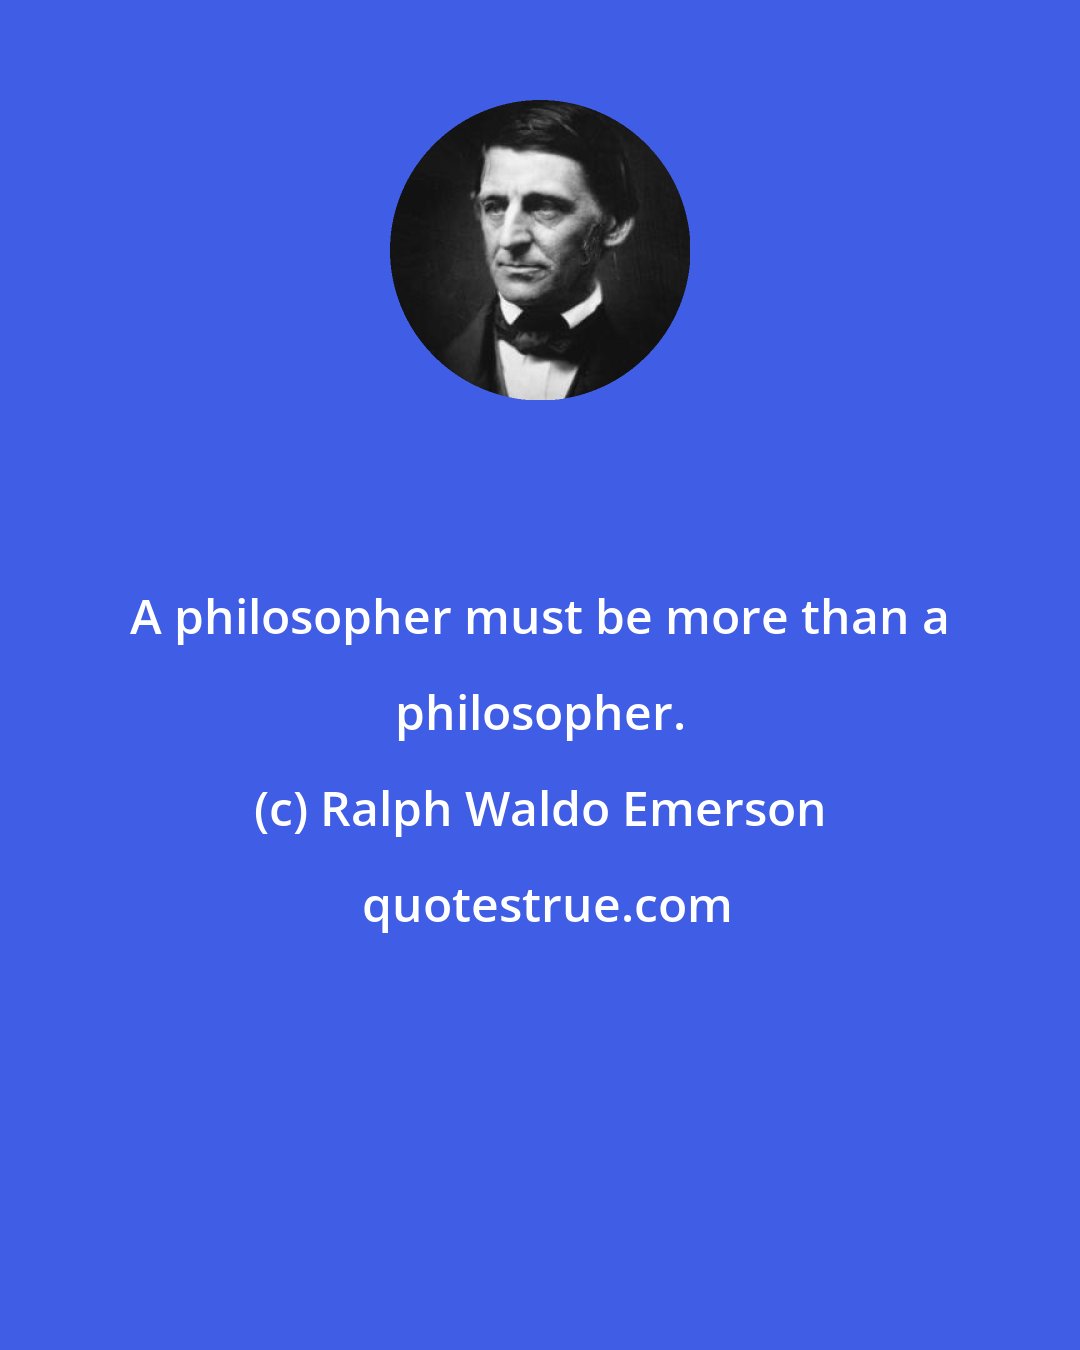 Ralph Waldo Emerson: A philosopher must be more than a philosopher.